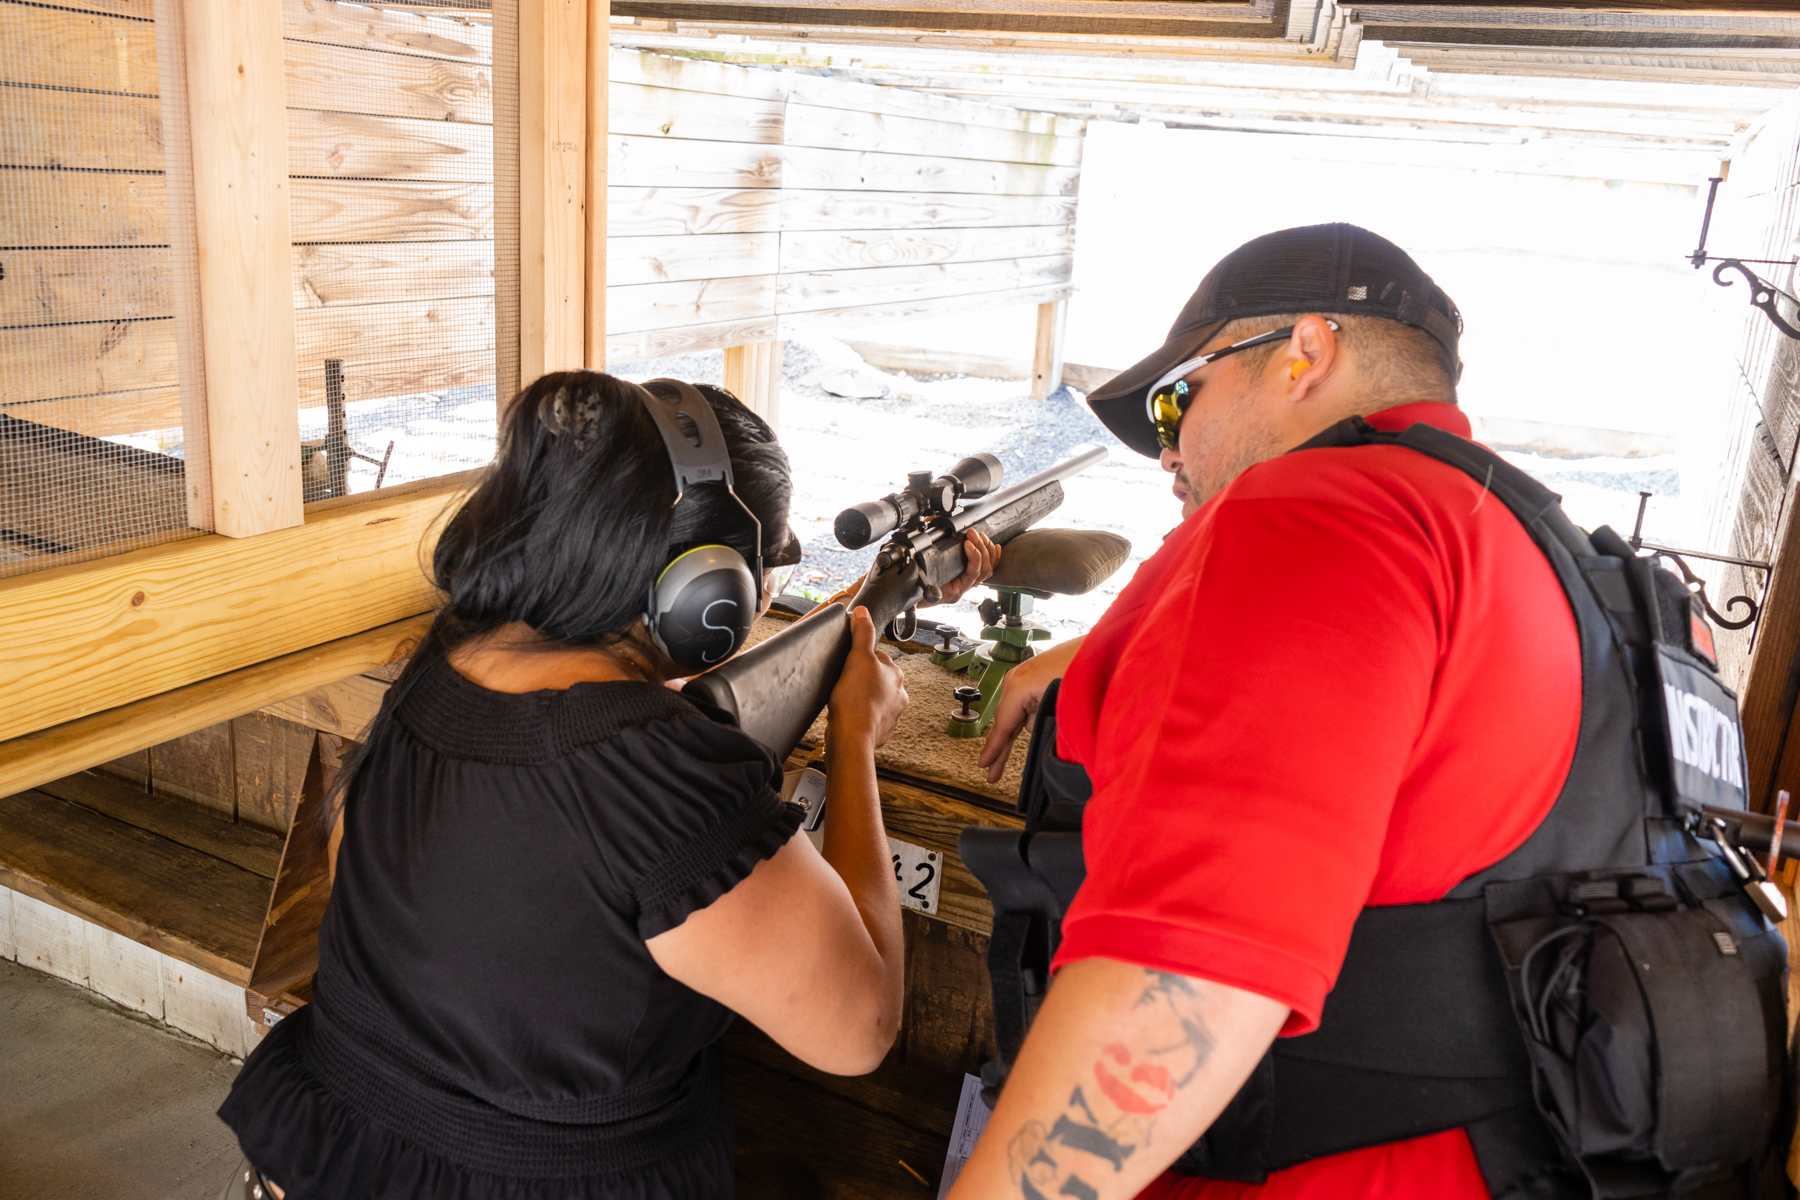 Woman practicing shooting firearms at a shooting range with a supervisor next to her observing